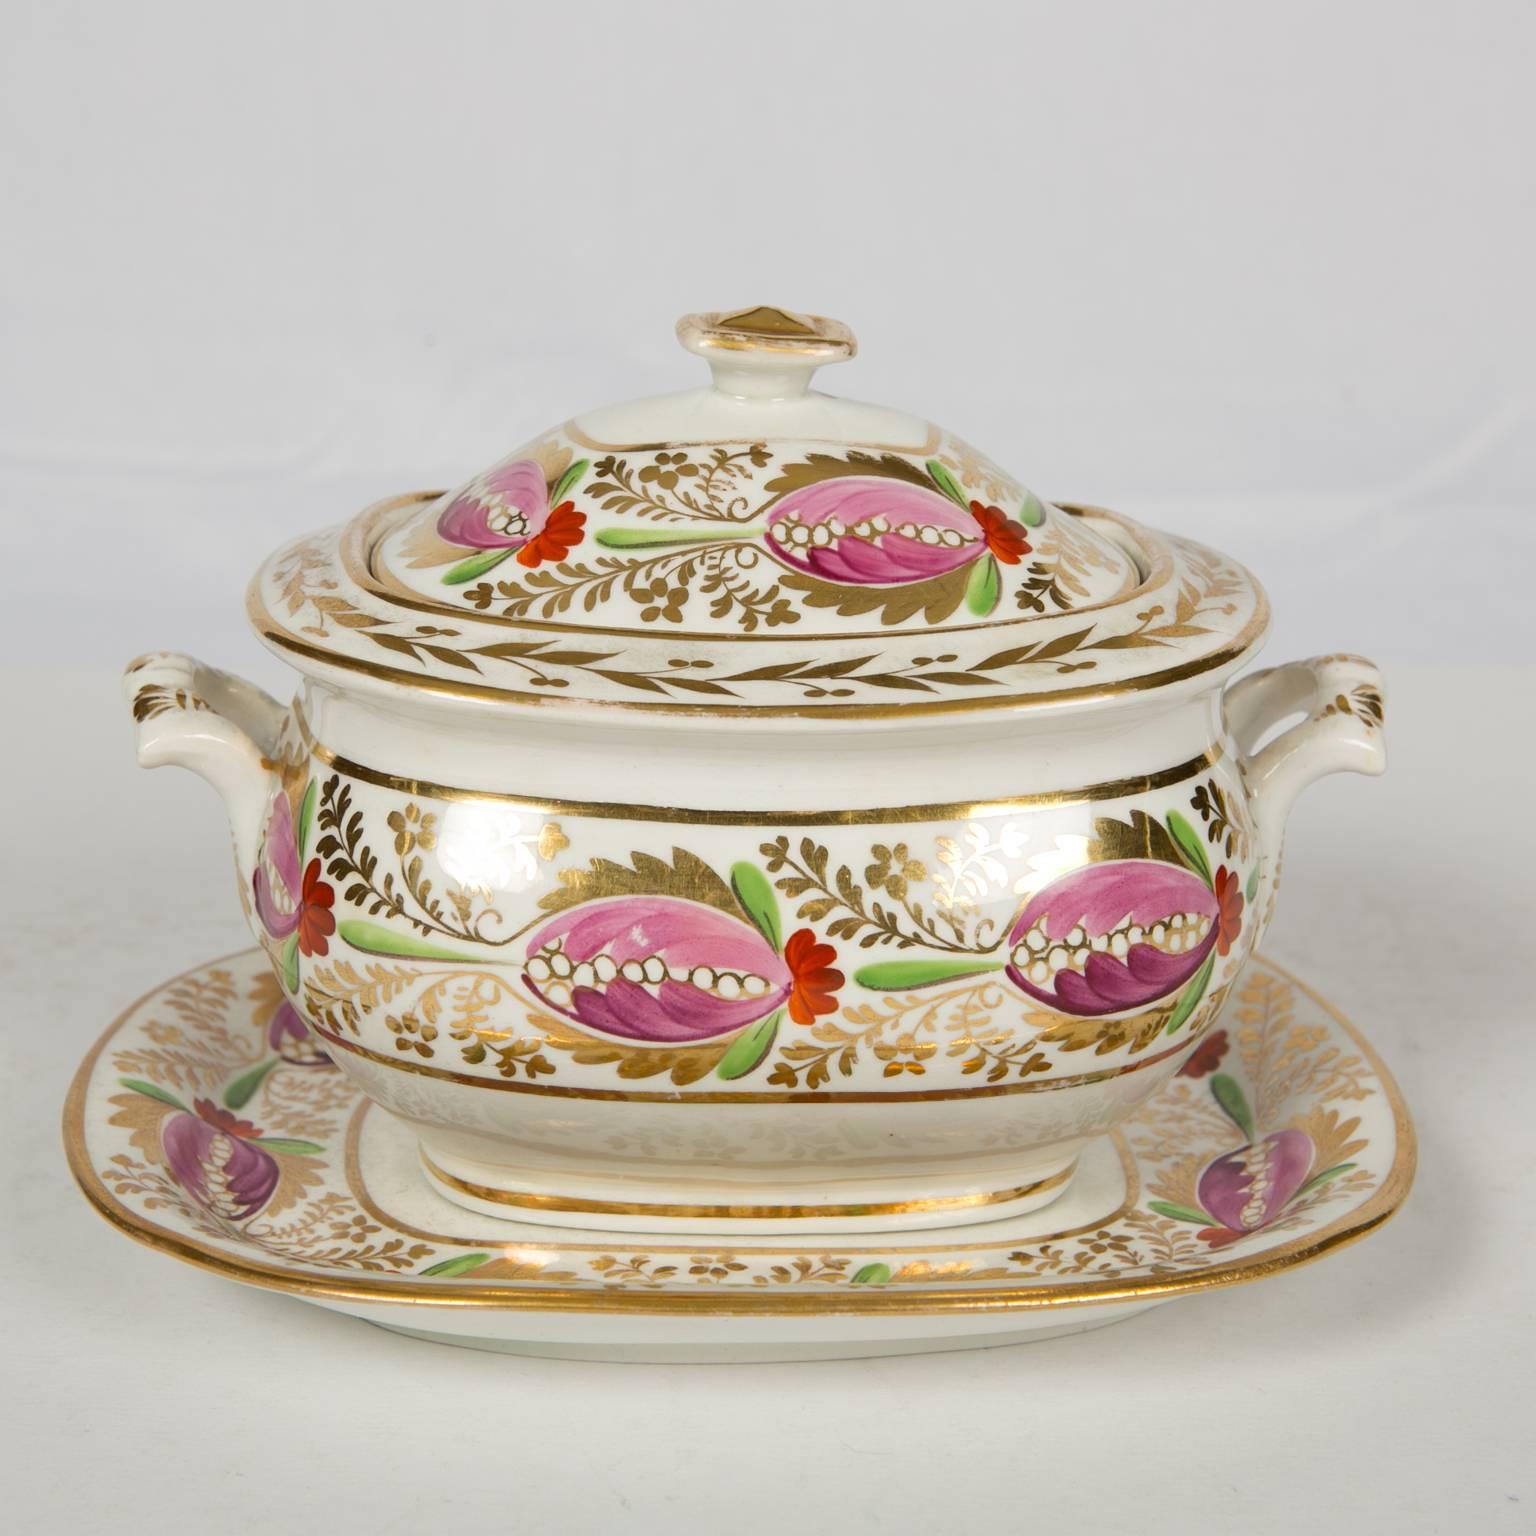 Early Victorian Floral and Gilt Covered Sugar Box and Stand Made circa 1830